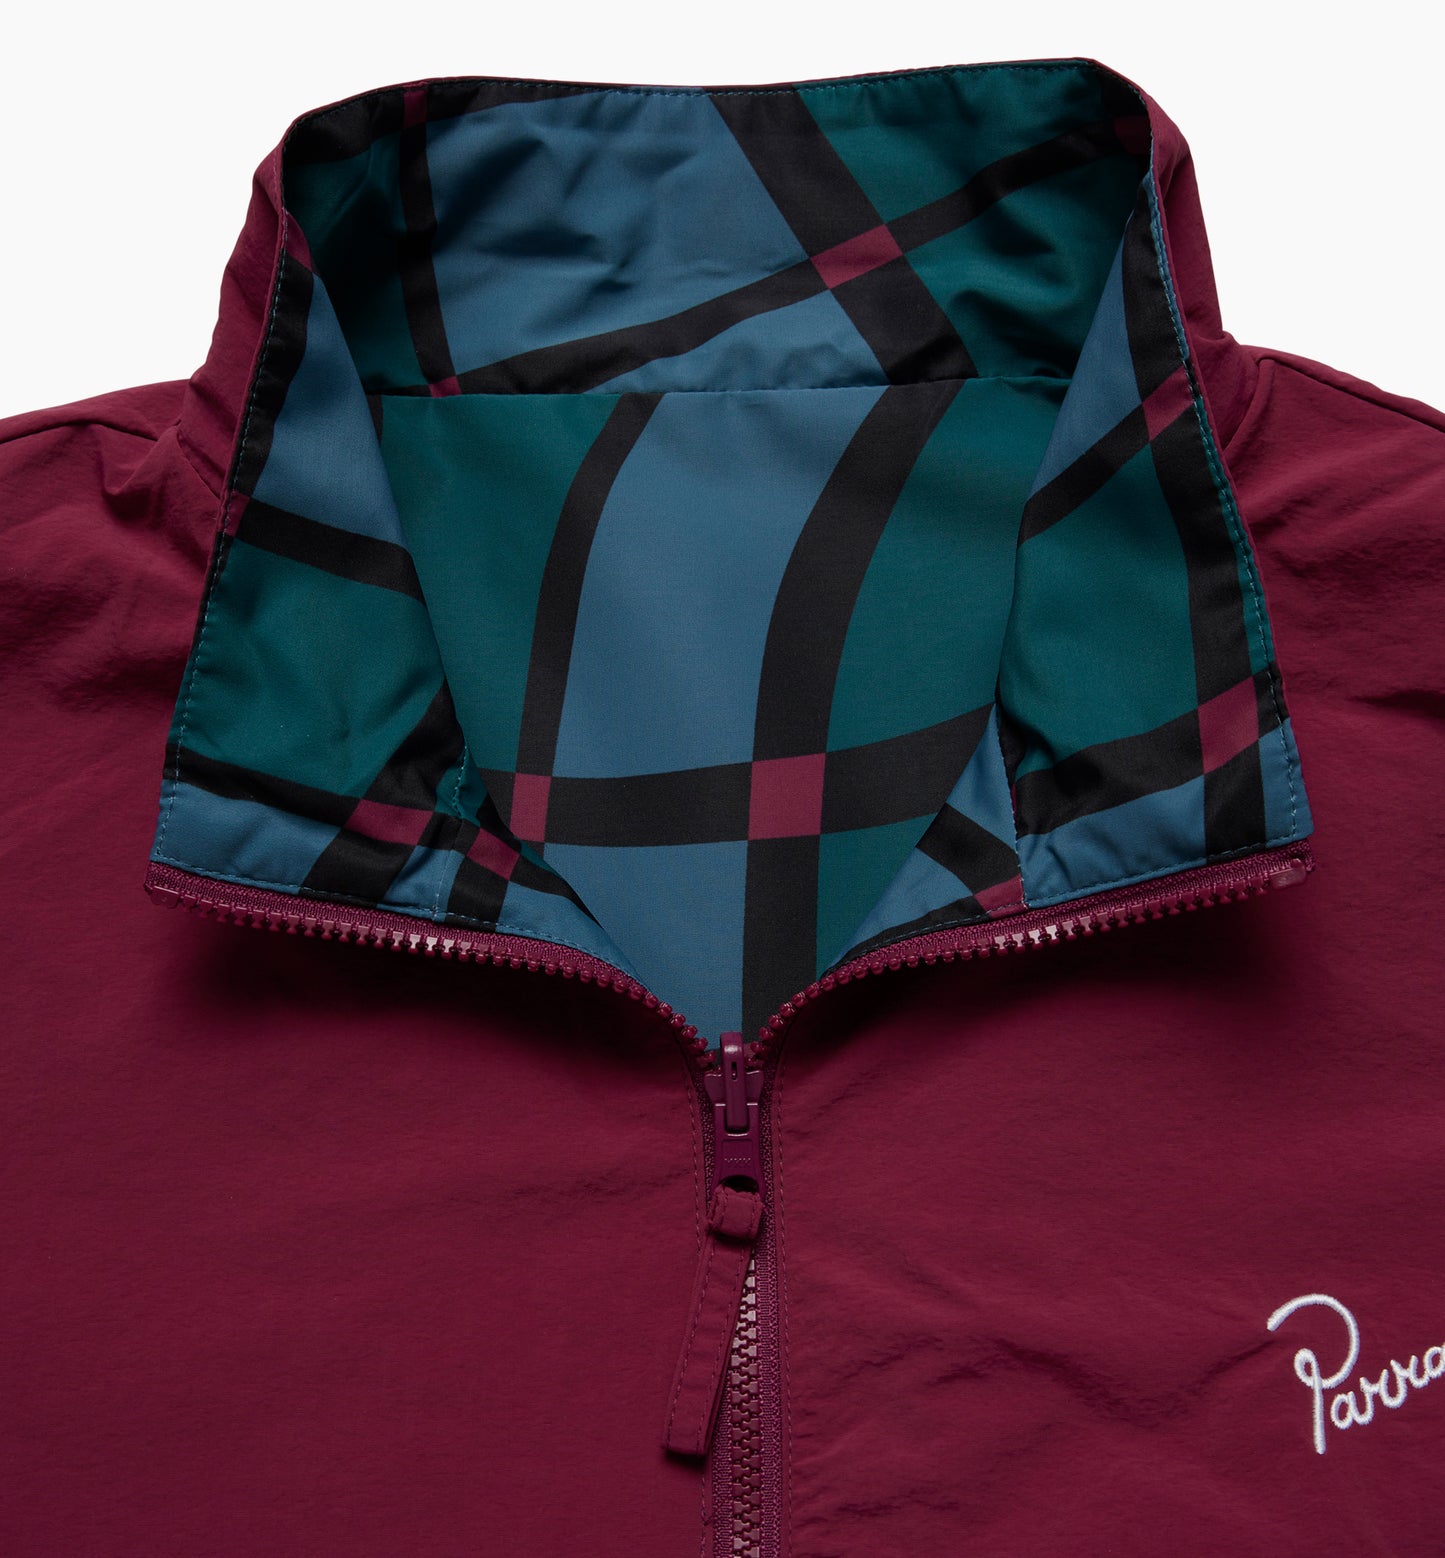 By Parra Squared Waves Pattern Track Top Check